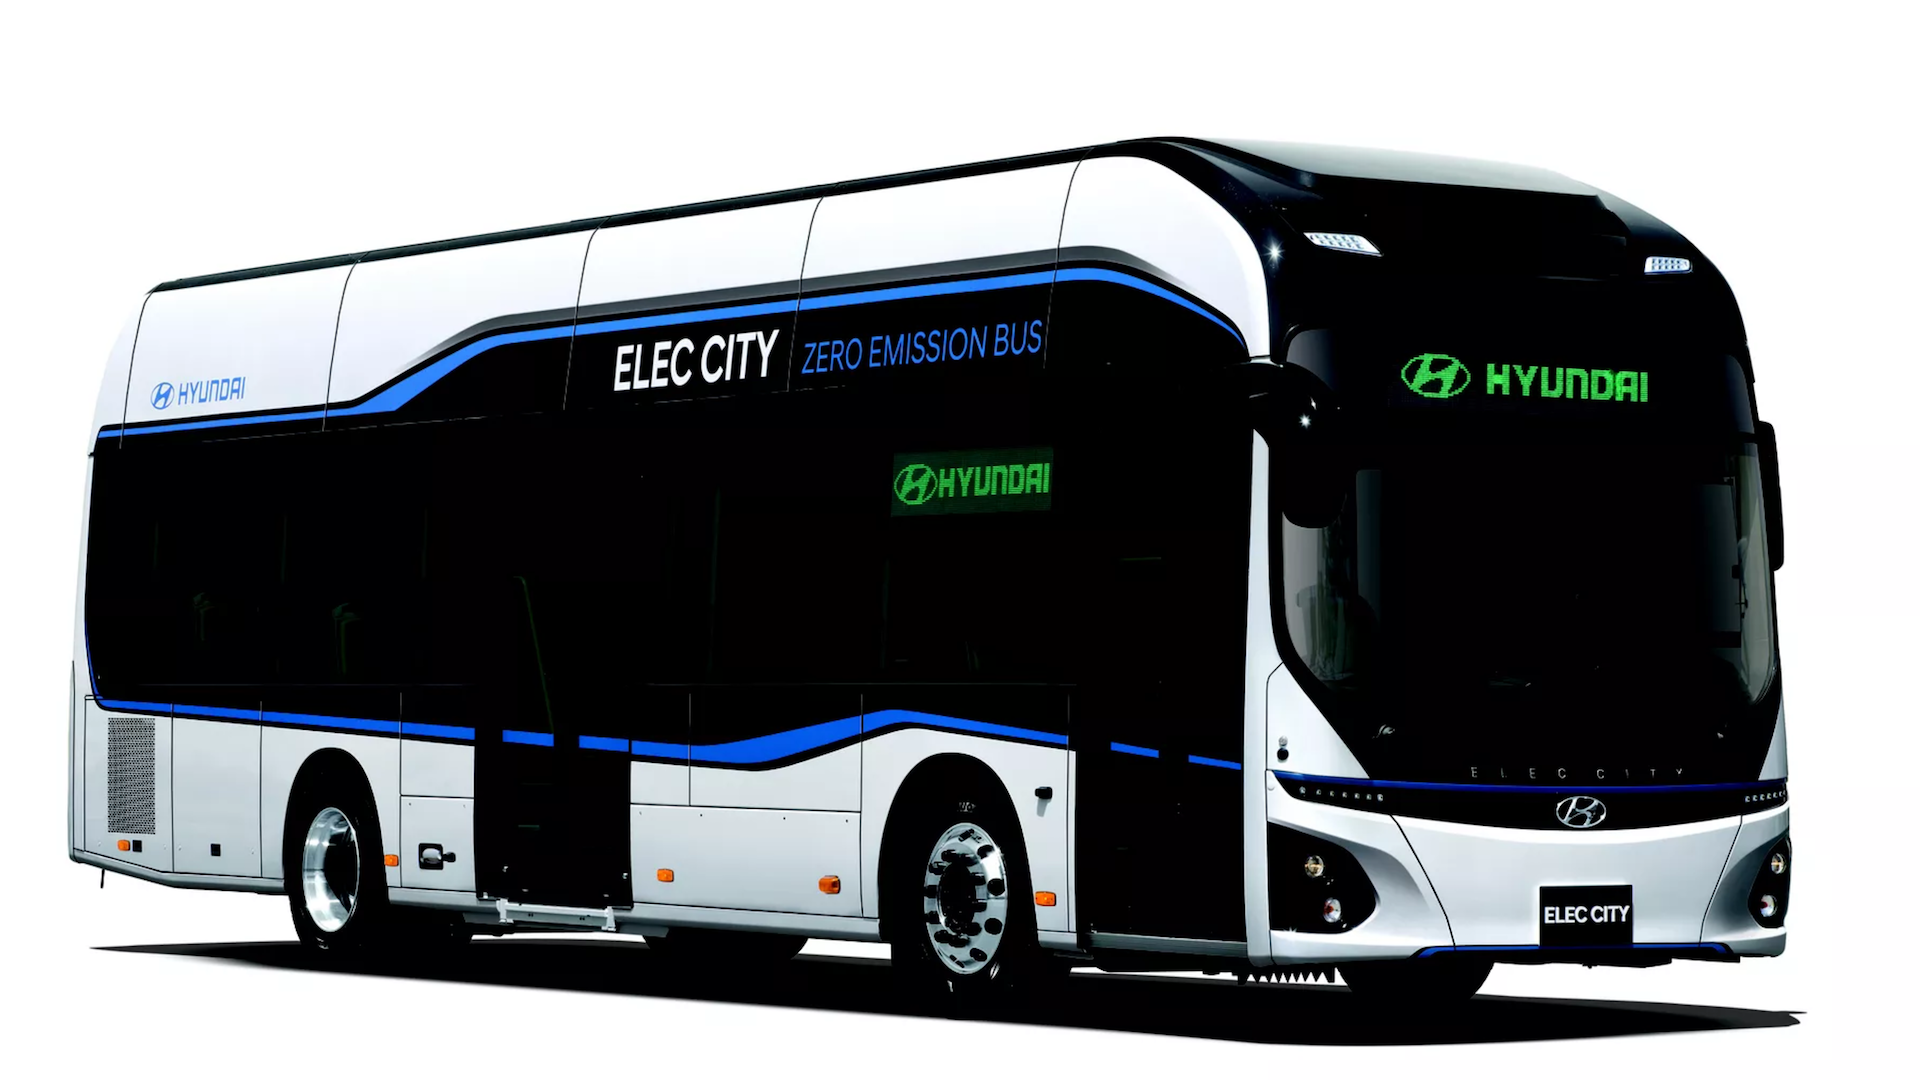 Hyundaiu0027S New Electric Bus Can Drive 180 Miles On An Houru0027S Charge   The Drive - Tour Bus, Transparent background PNG HD thumbnail